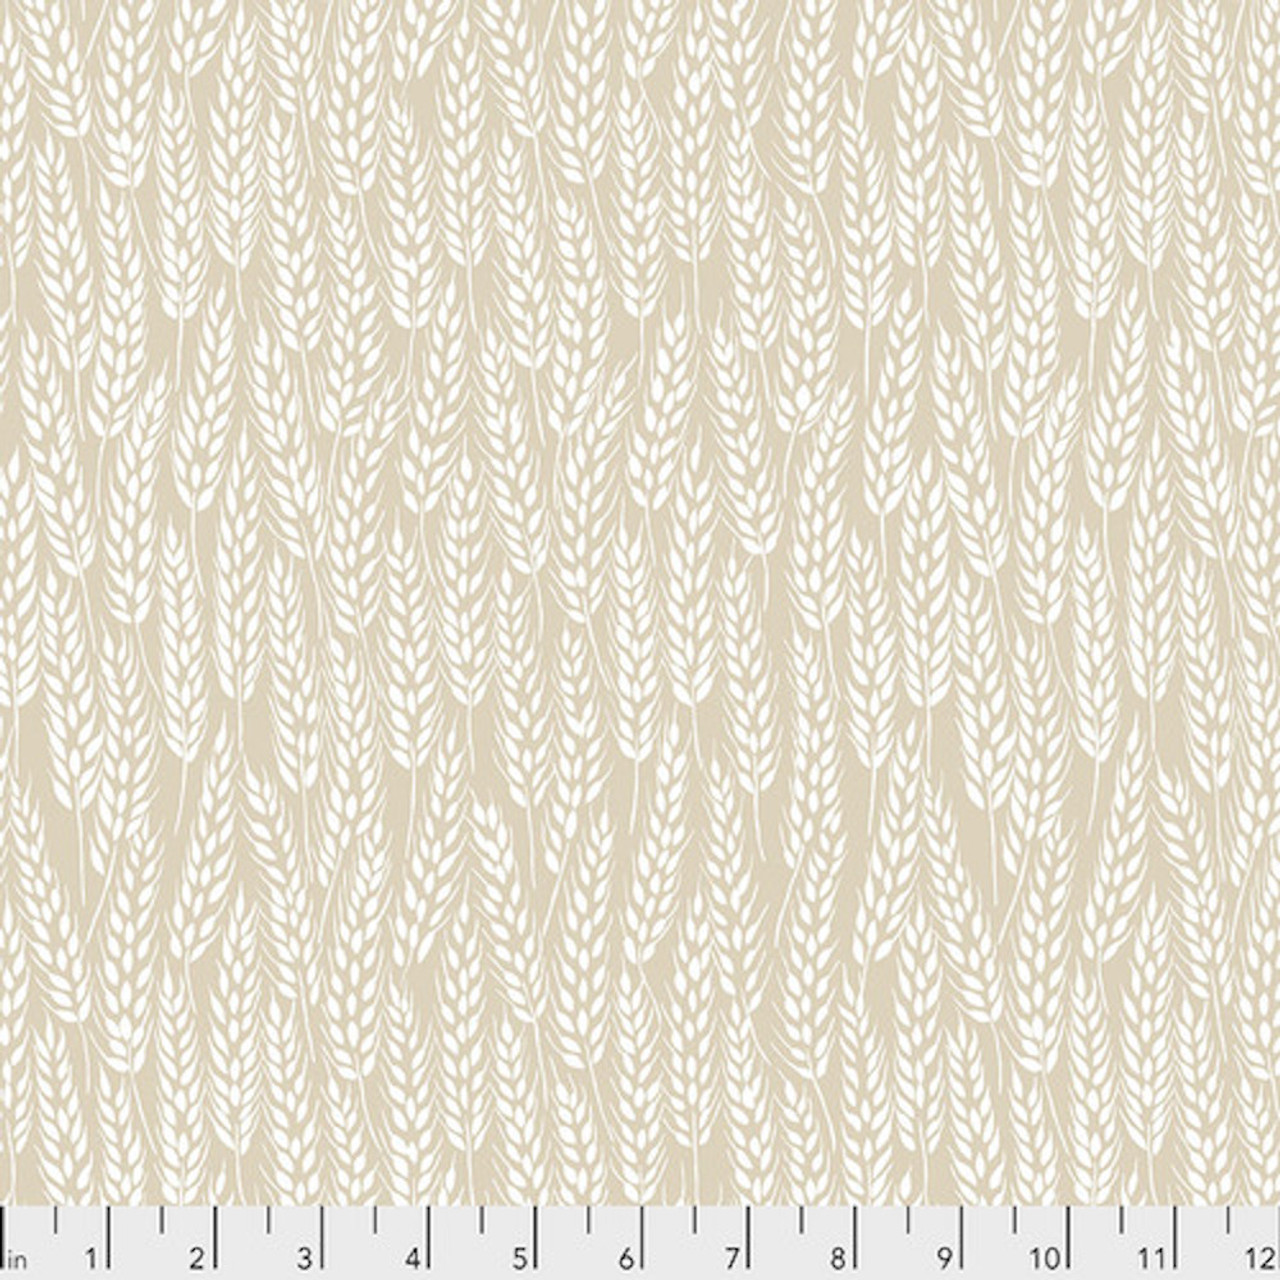 Snow Leopard PWSL078 Neddy's Meadow Meadow Grass Natural Cotton Fabric By The Yard